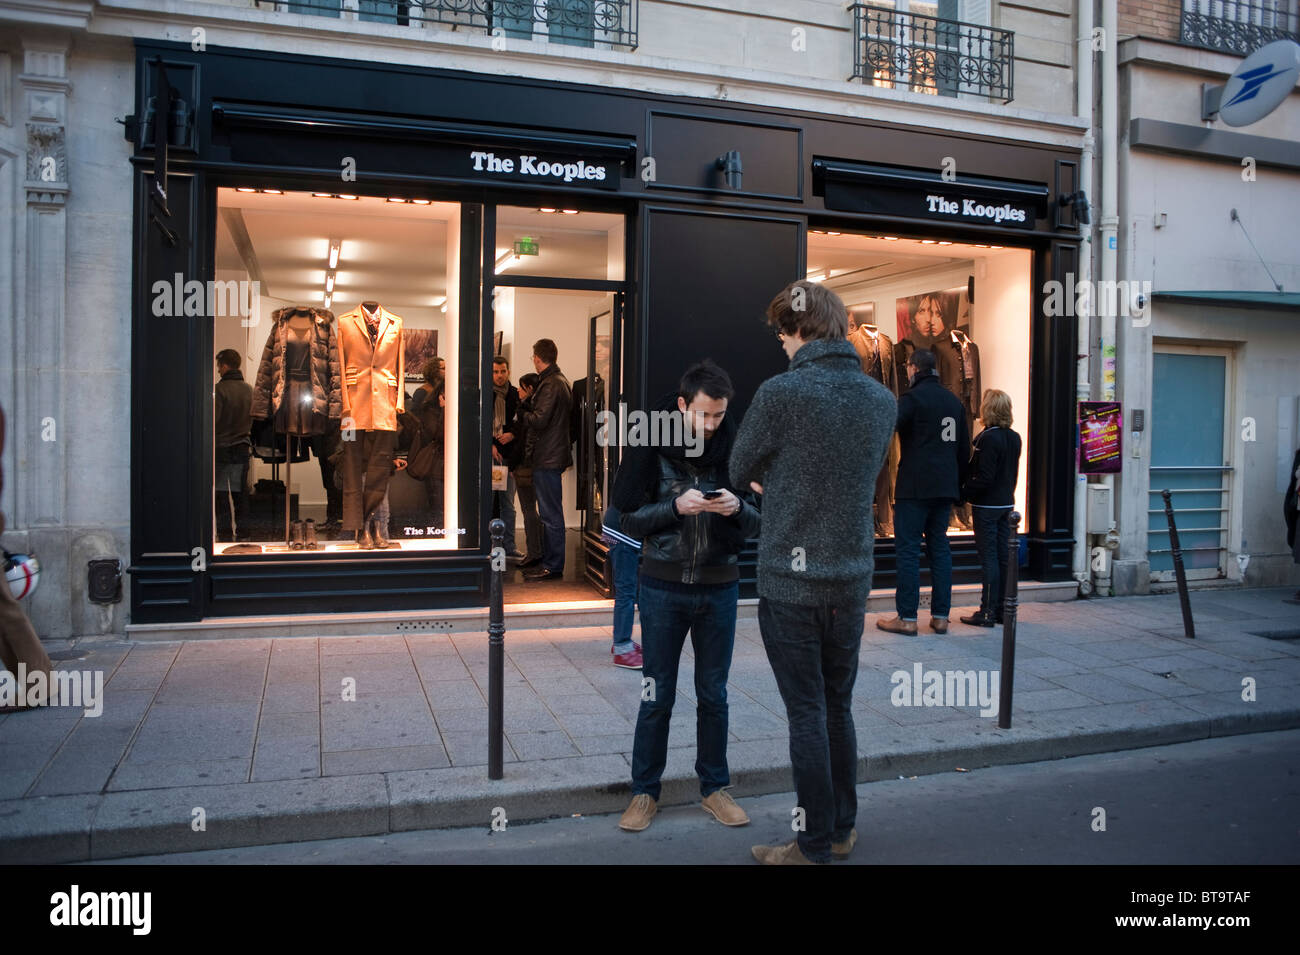 Paris, France, Street Scene, Le Marais District, Men With Cellphones Standing Outside Local Clothing Store, Shop Front 'The Kooples' Local Brand Stock Photo